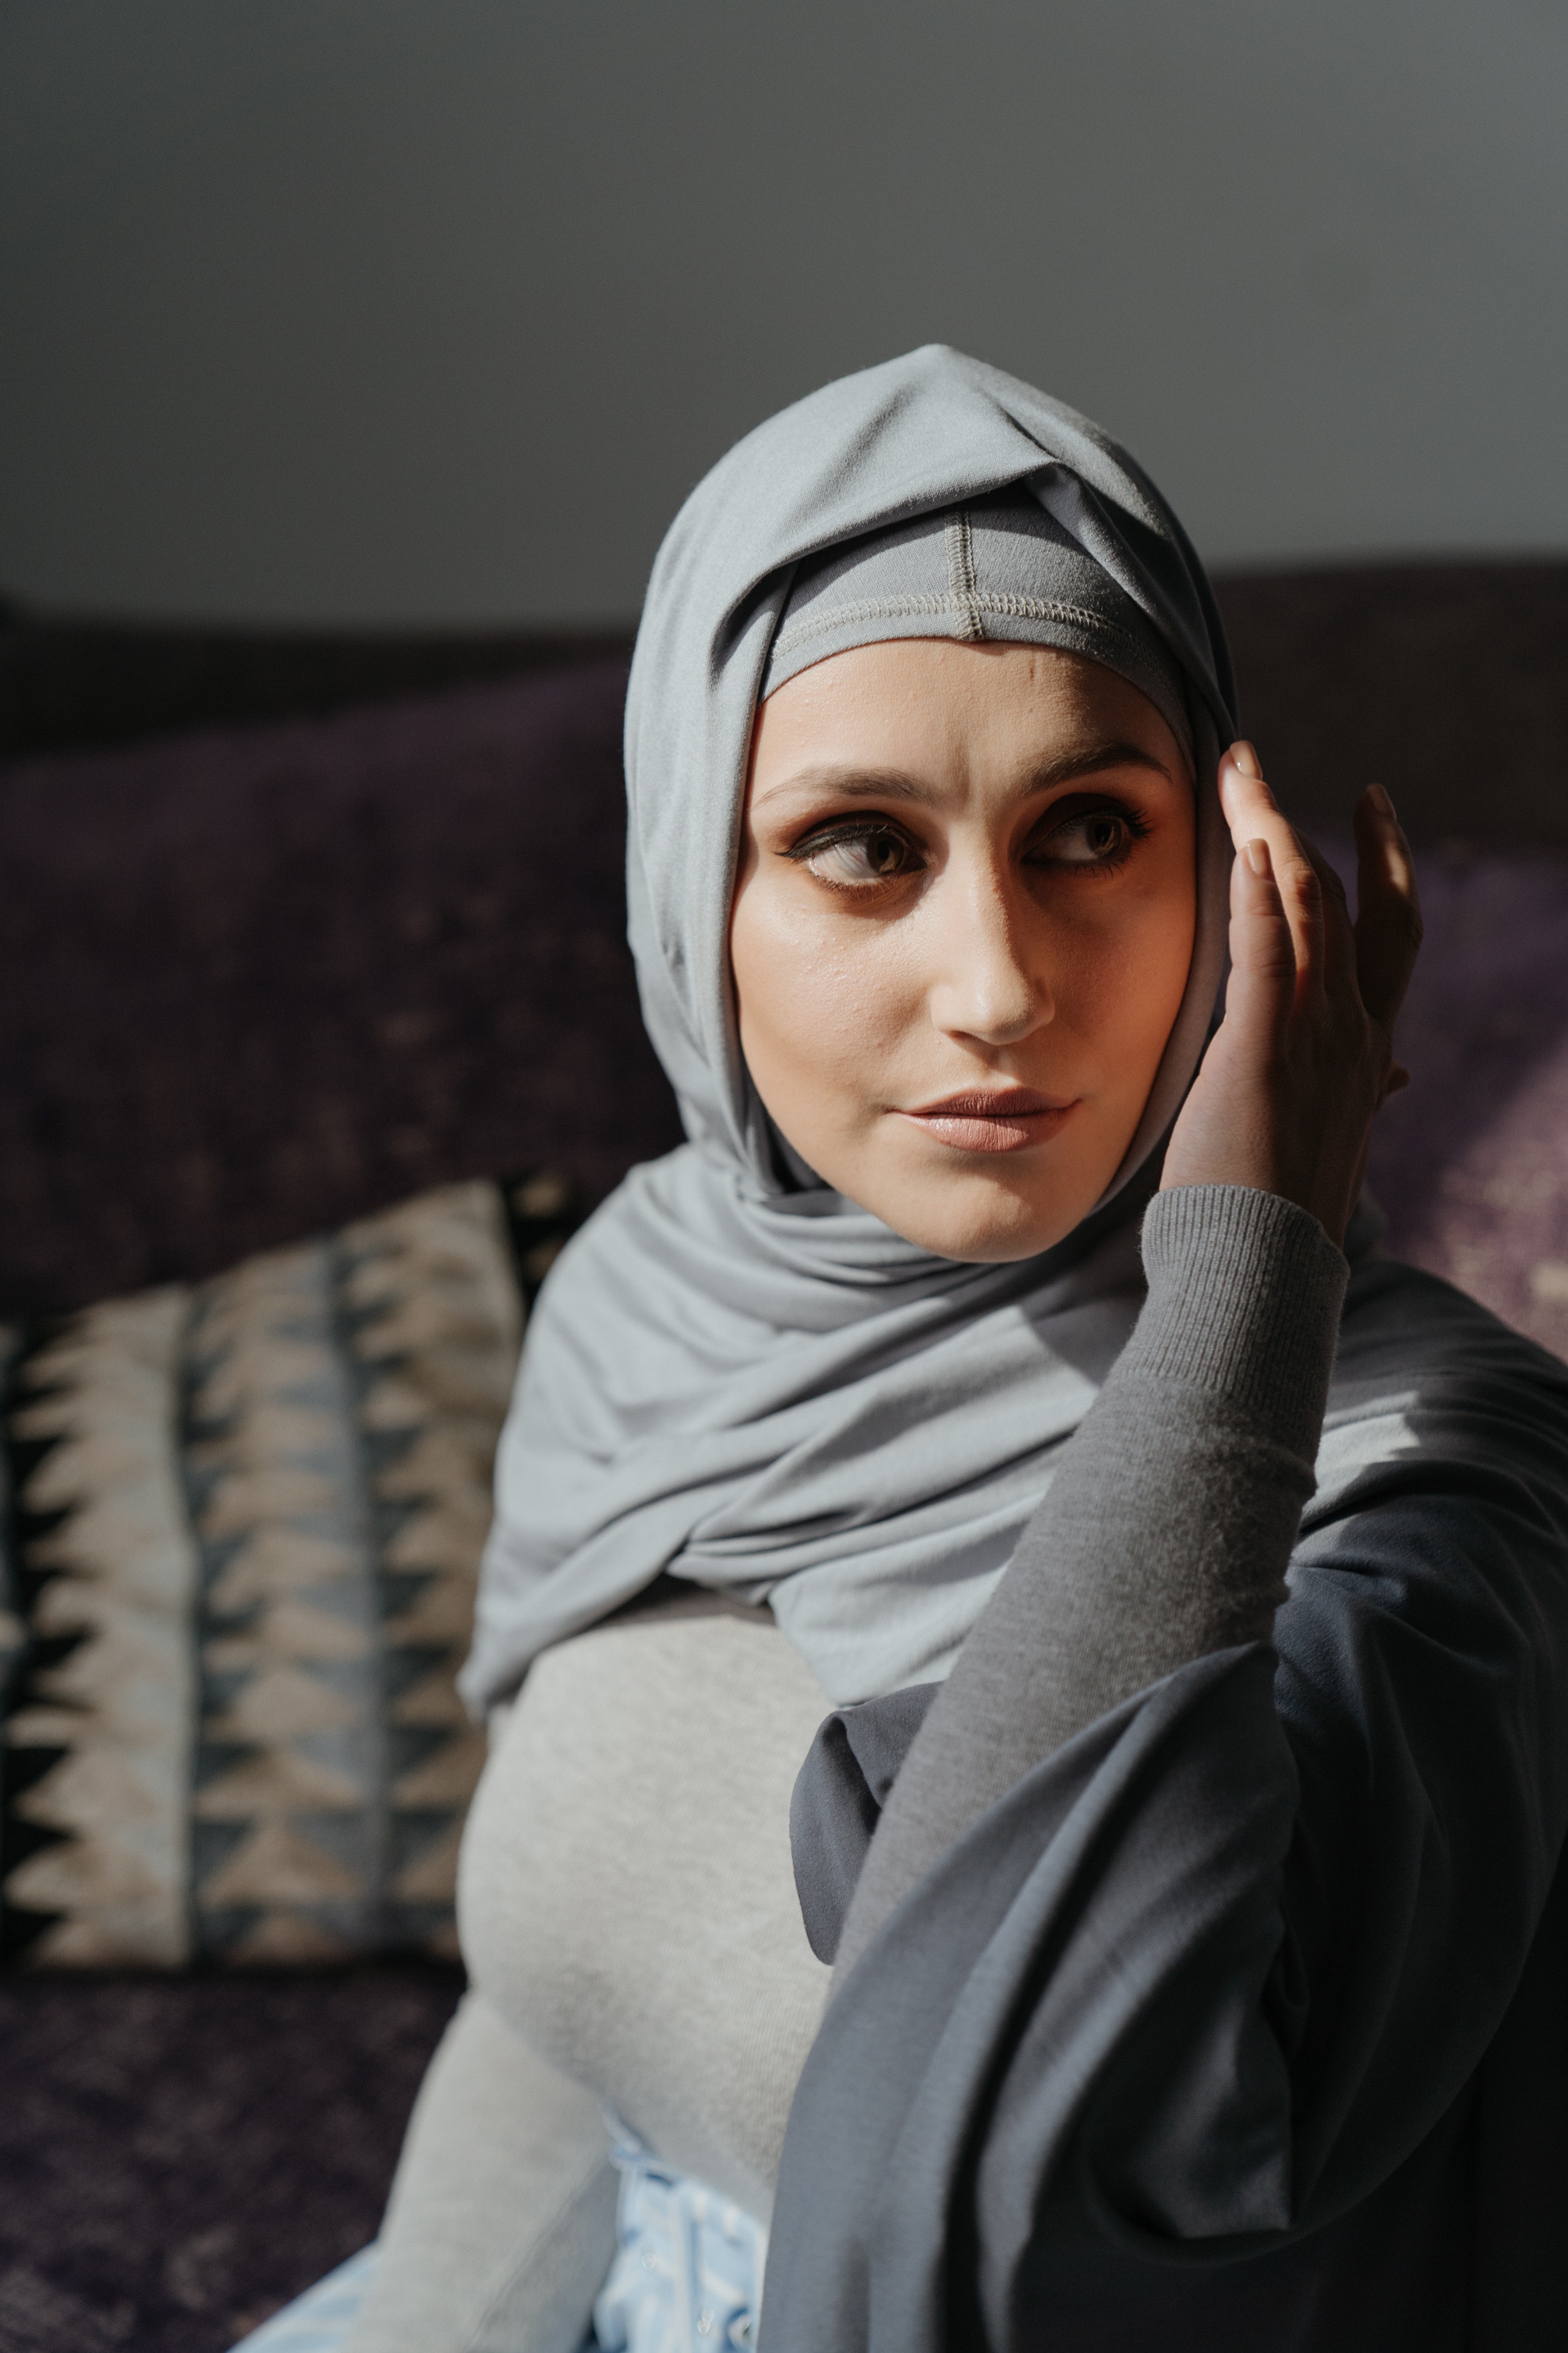 woman in gray hijab sitting on couch 4620864